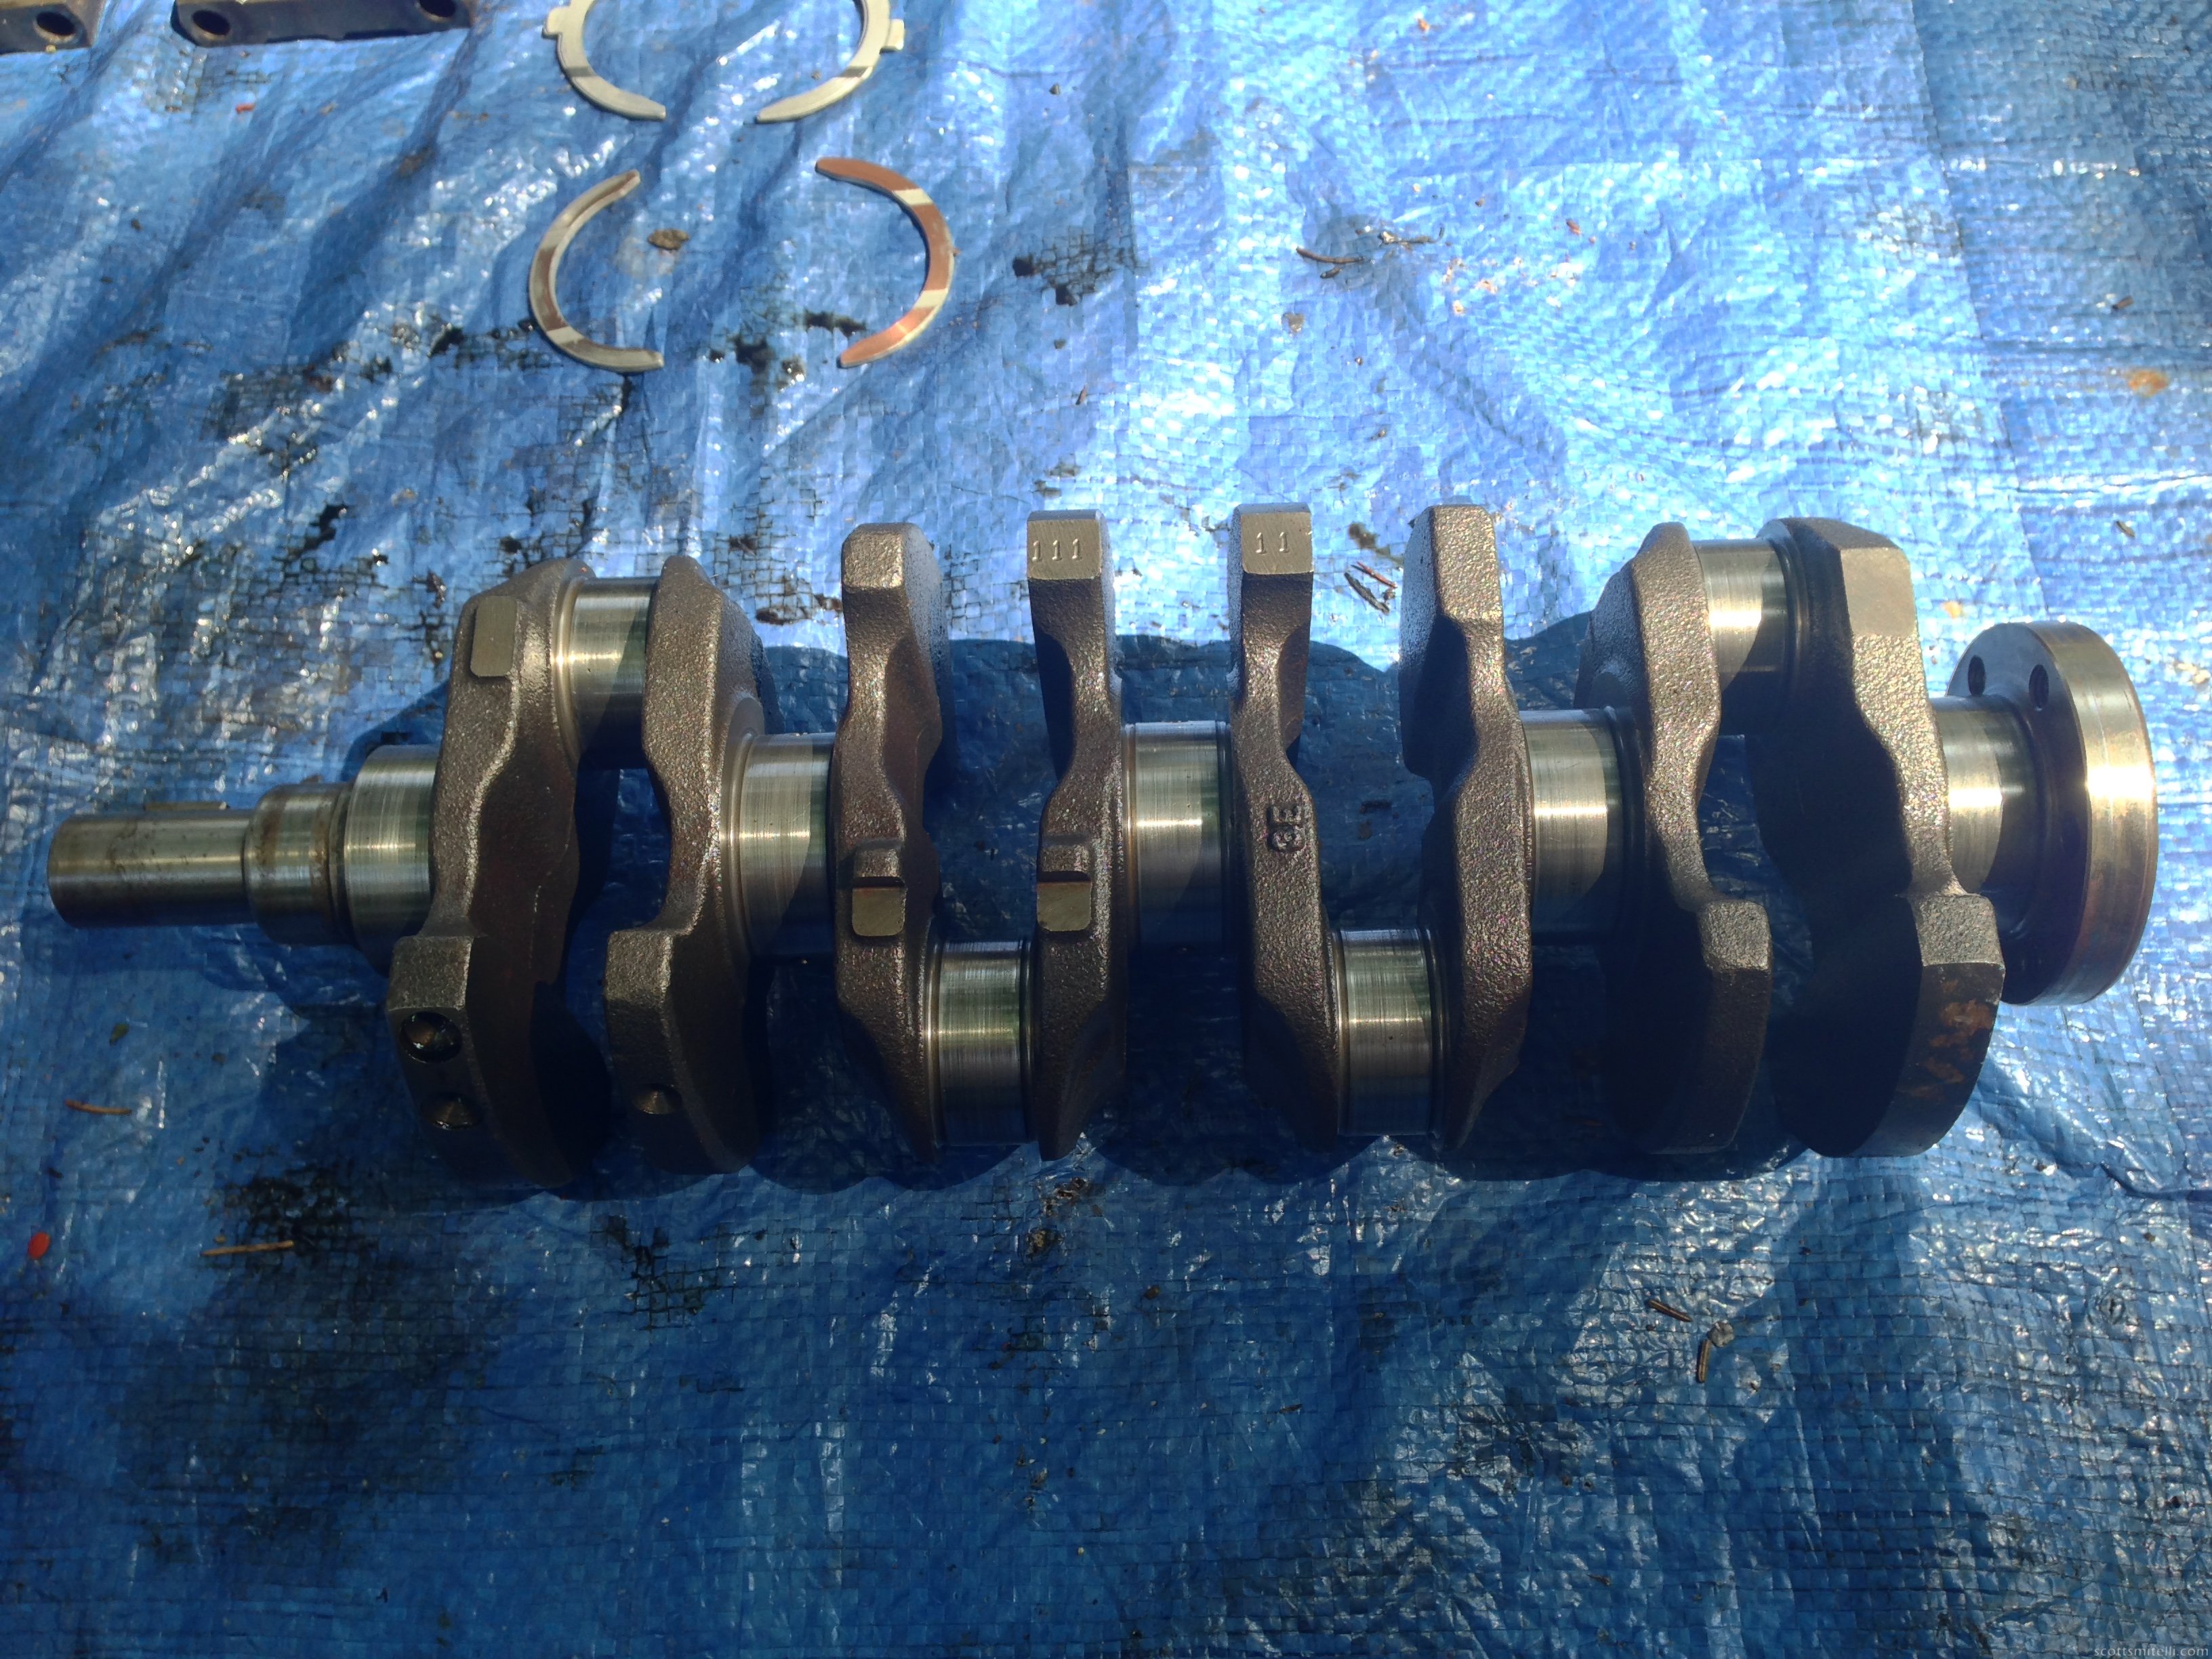 Overall view of the crankshaft